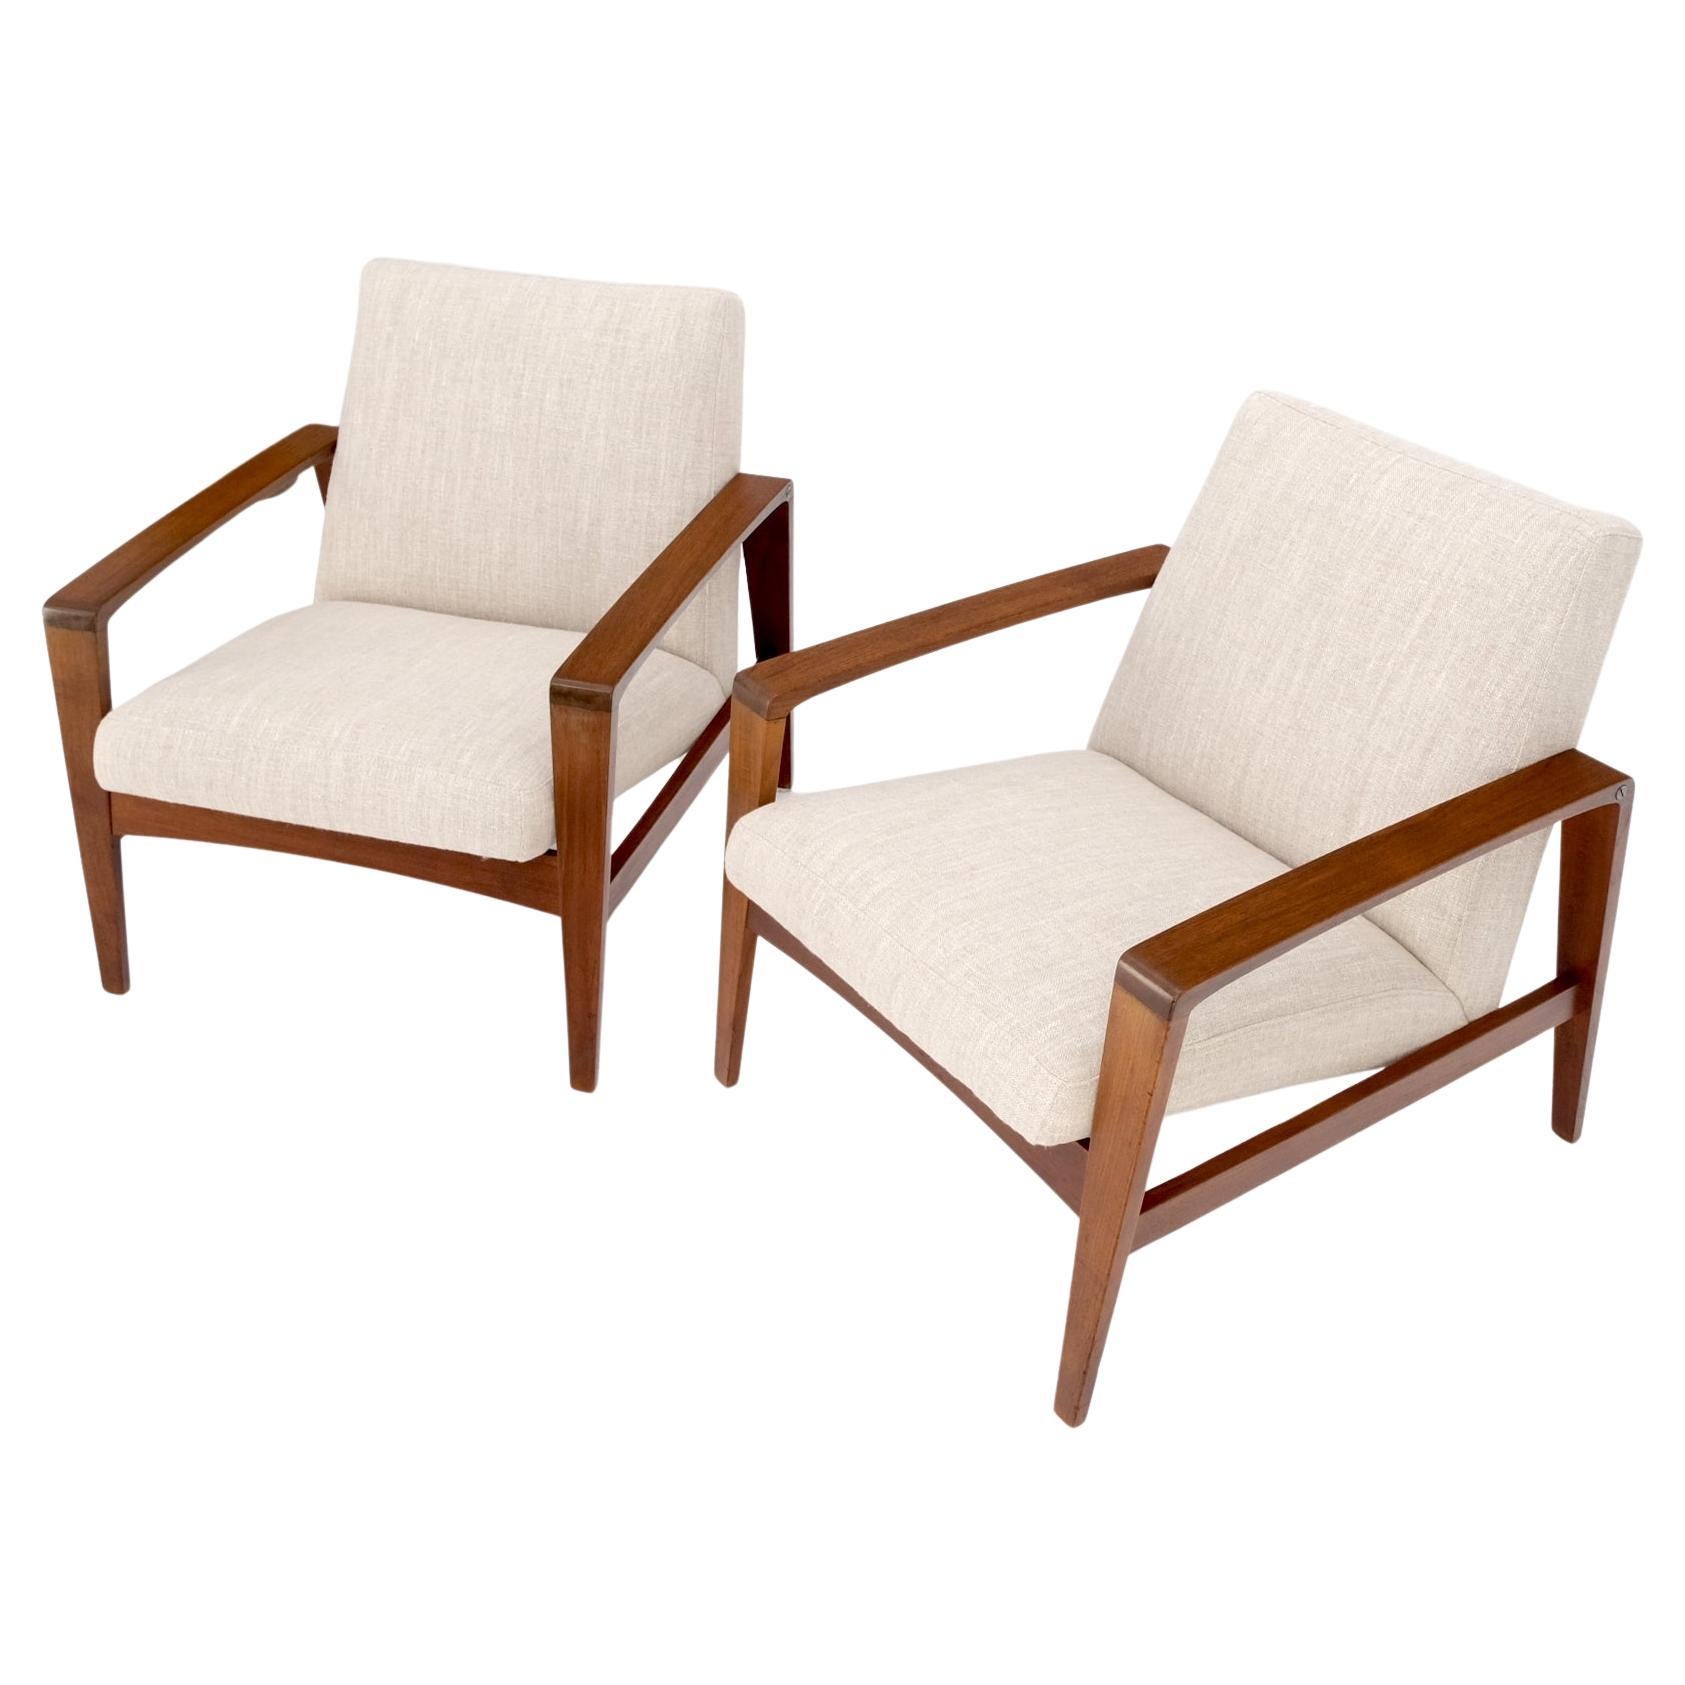 Pair restored new oatmeal upholstery teak Mid-Century Modern Lounge arm chairs.